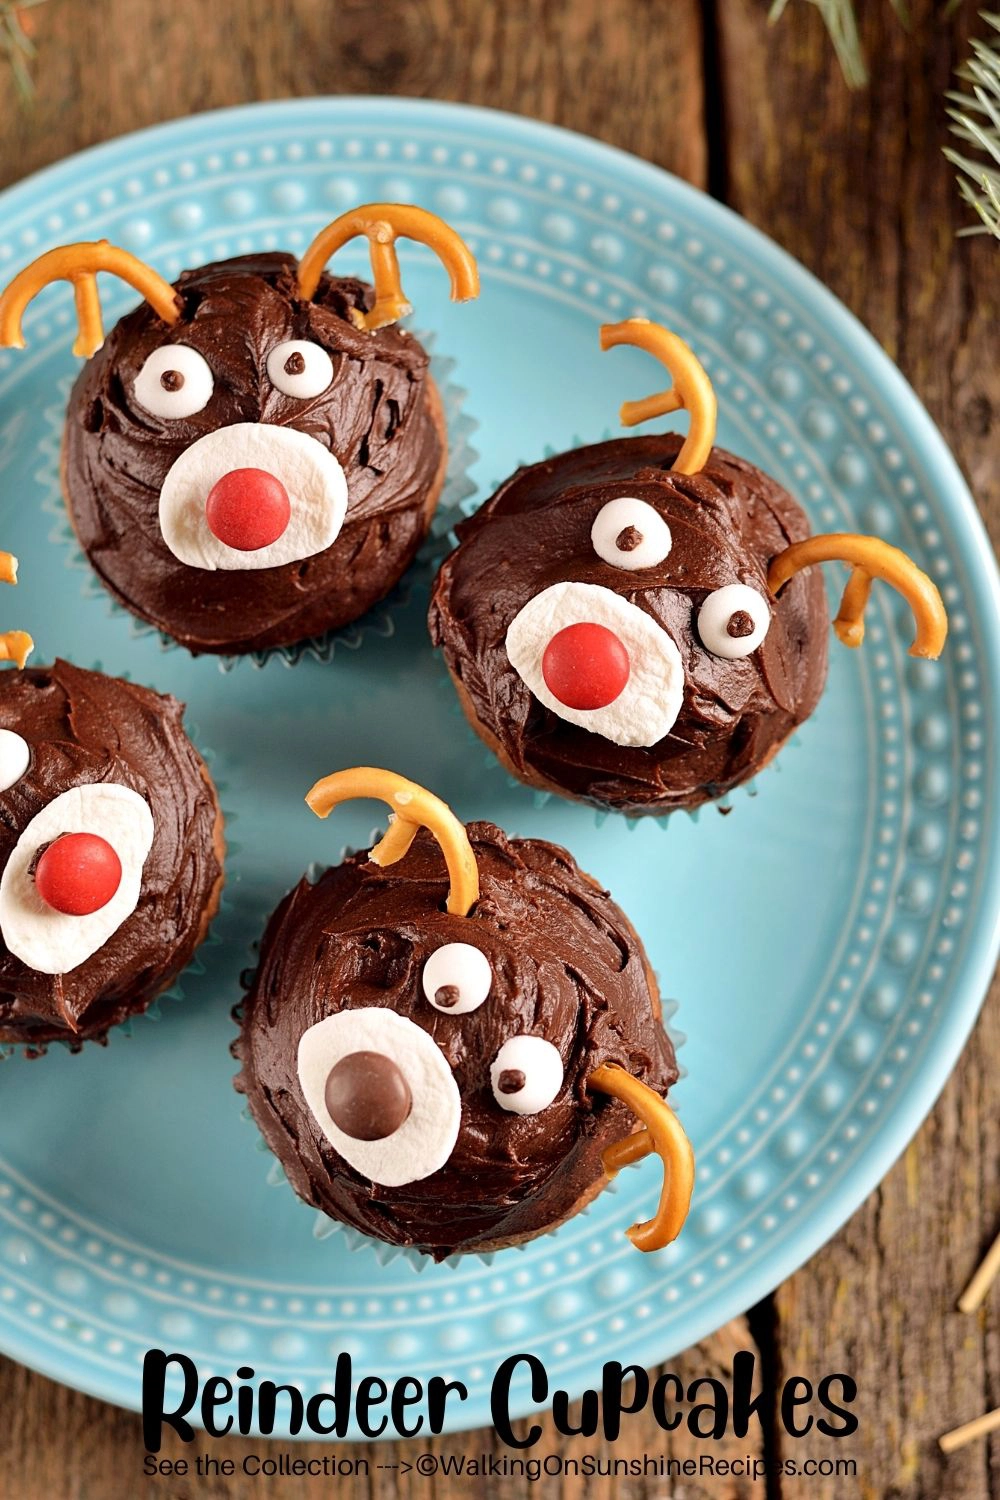 cupcakes decorated as reindeers on blue plate. 